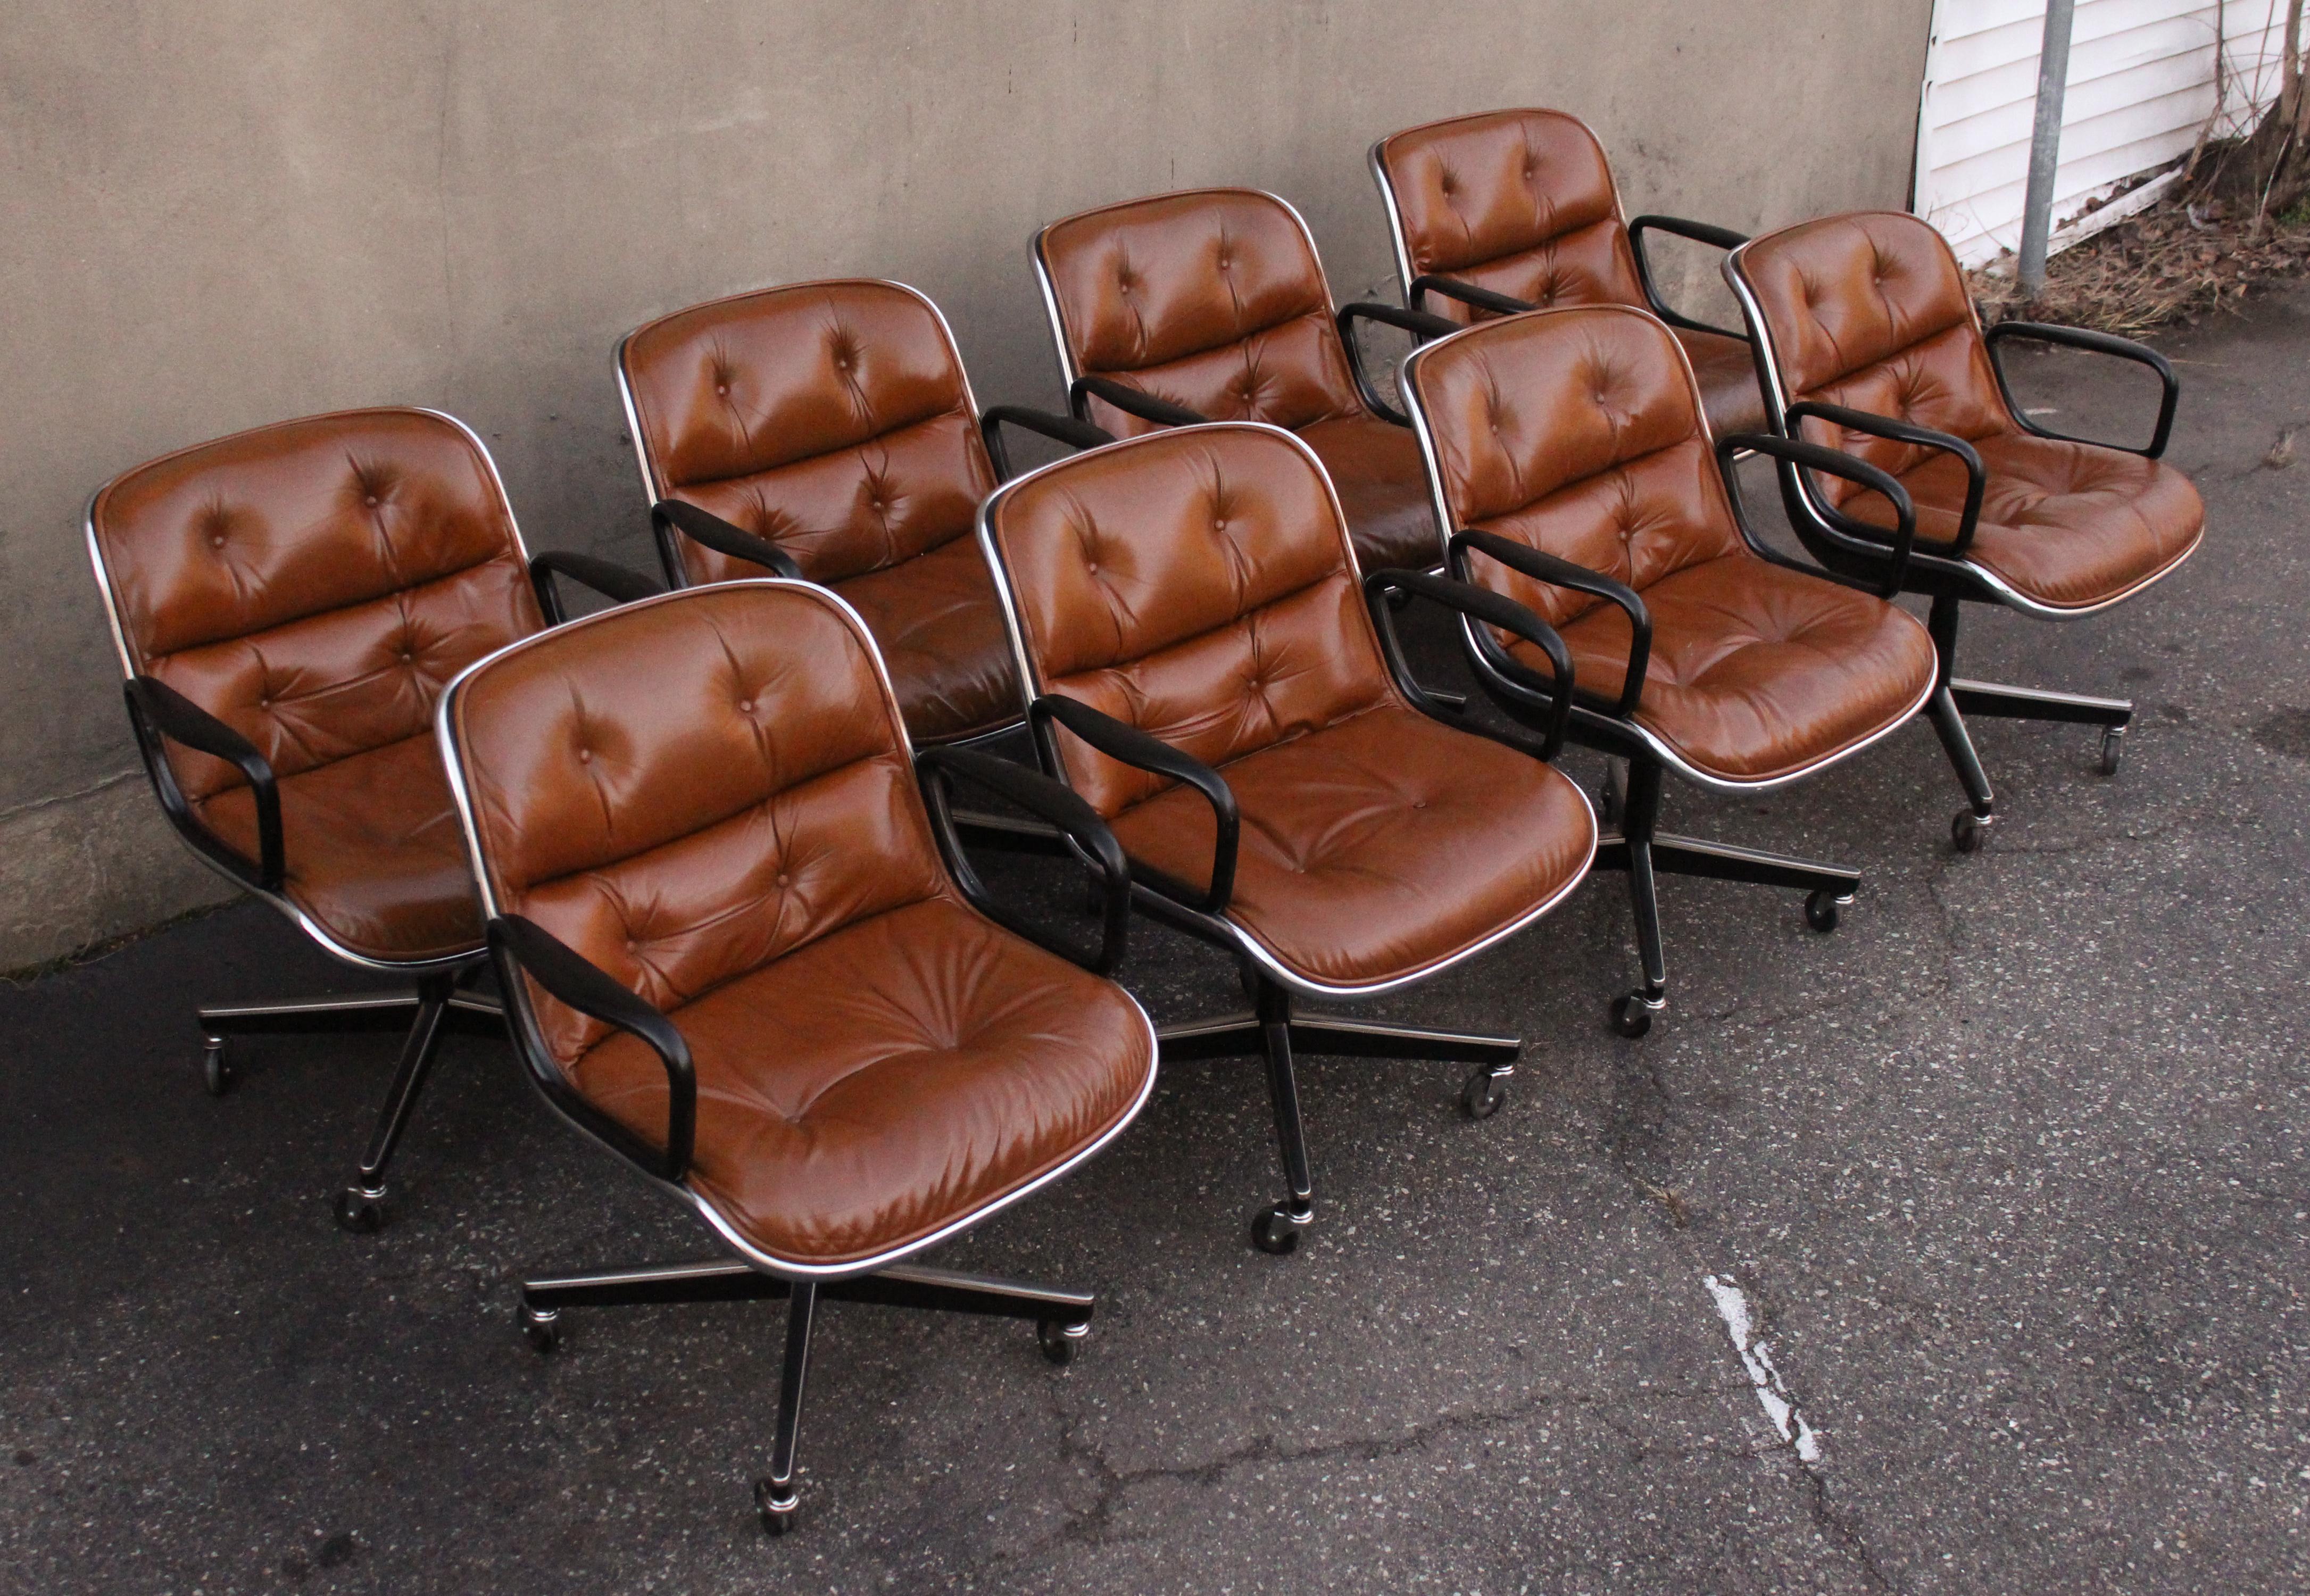 Comfortable executive desk chairs designed by Charles Pollock and manufactured by Knoll International, United States. These desk chairs are made of high quality medium brown leather, have chrome plated legs and footrests and plastic arms. The